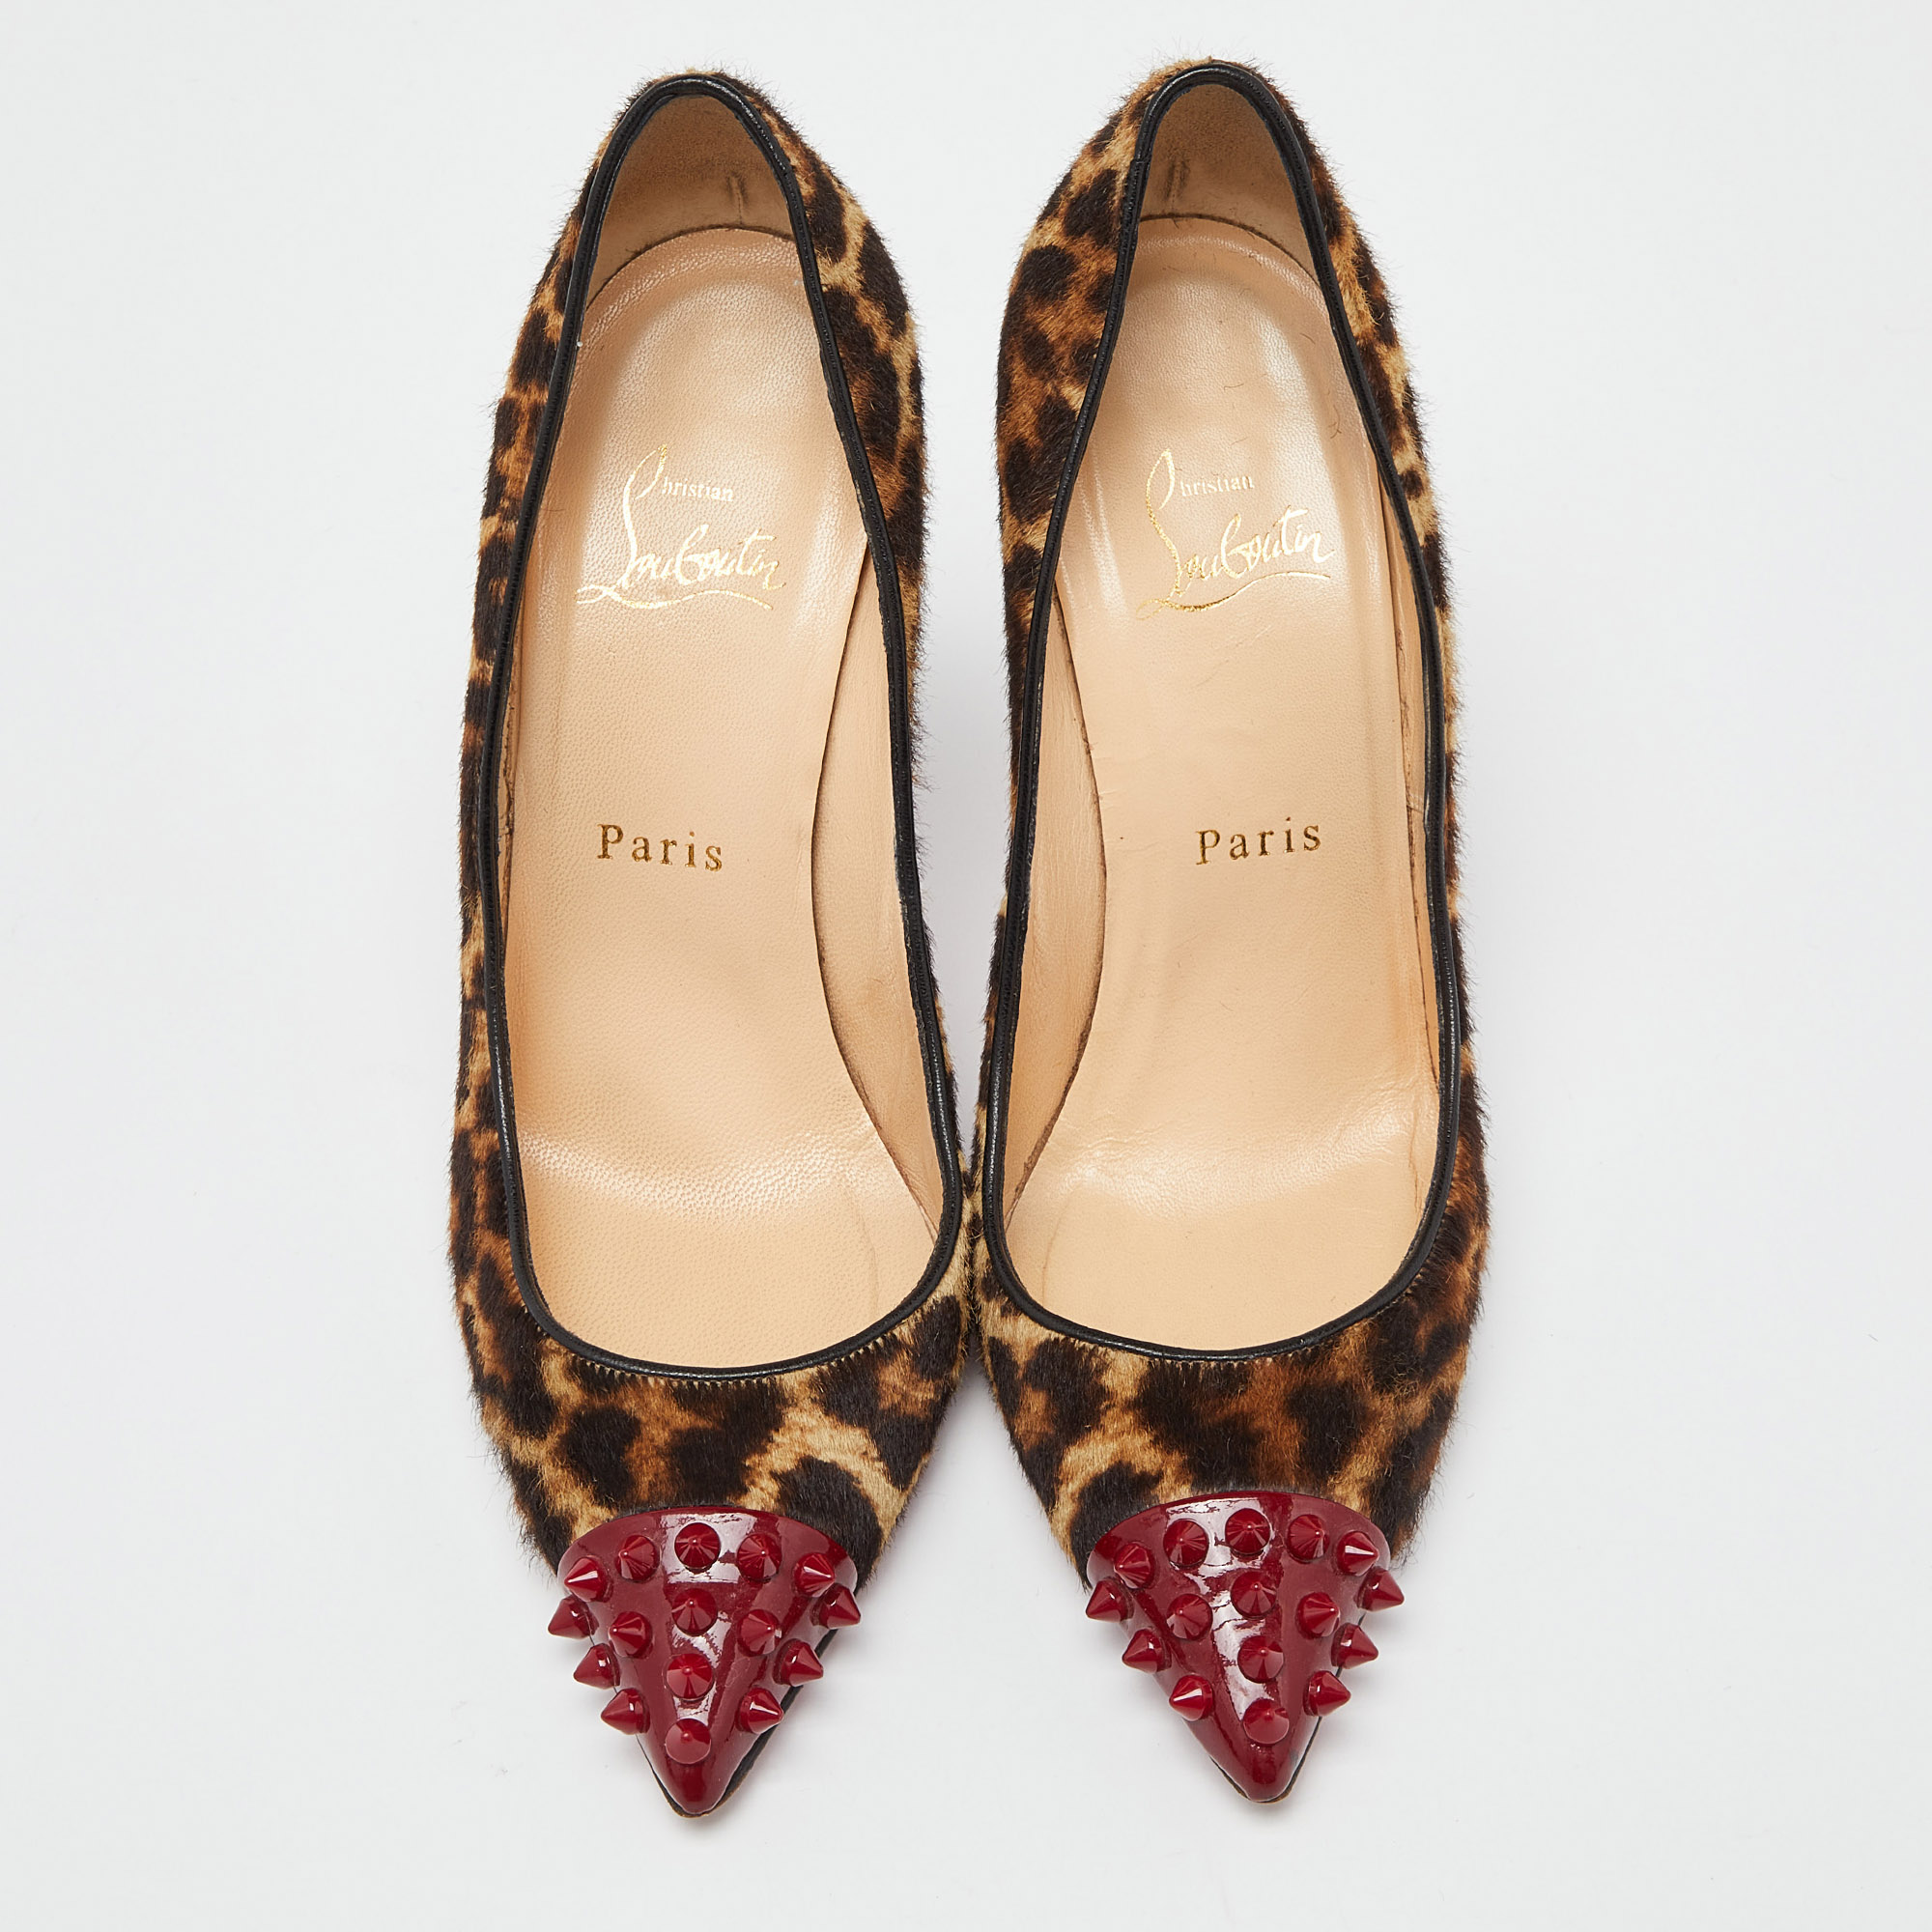 Christian Louboutin Brown/Red Leopard Print Calfhair Geo Spike Studded Cap Toe Pumps Size 37